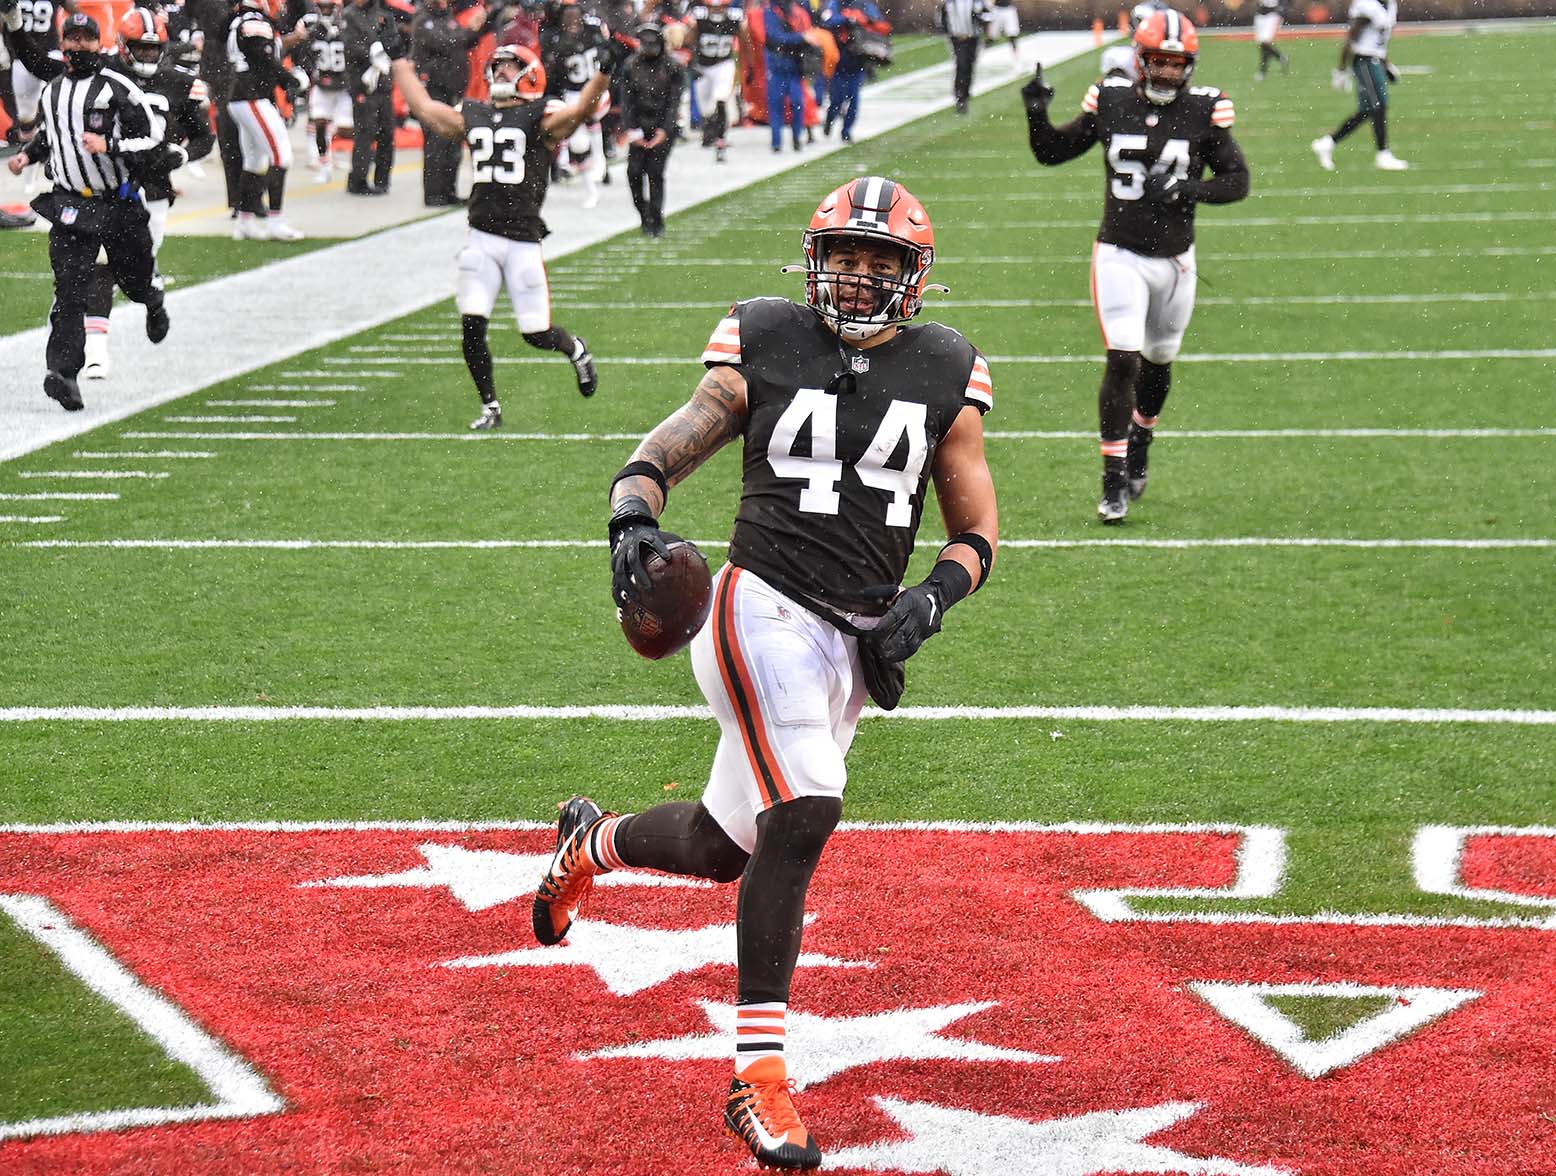 CLEVELAND, OHIO - NOVEMBER 22: Sione Takitaki #44 of the Cleveland Browns celebrates a touchdown during the first half against the Philadelphia Eagles at FirstEnergy Stadium on November 22, 2020 in Cleveland, Ohio. (Photo by Jason Miller/Getty Images)